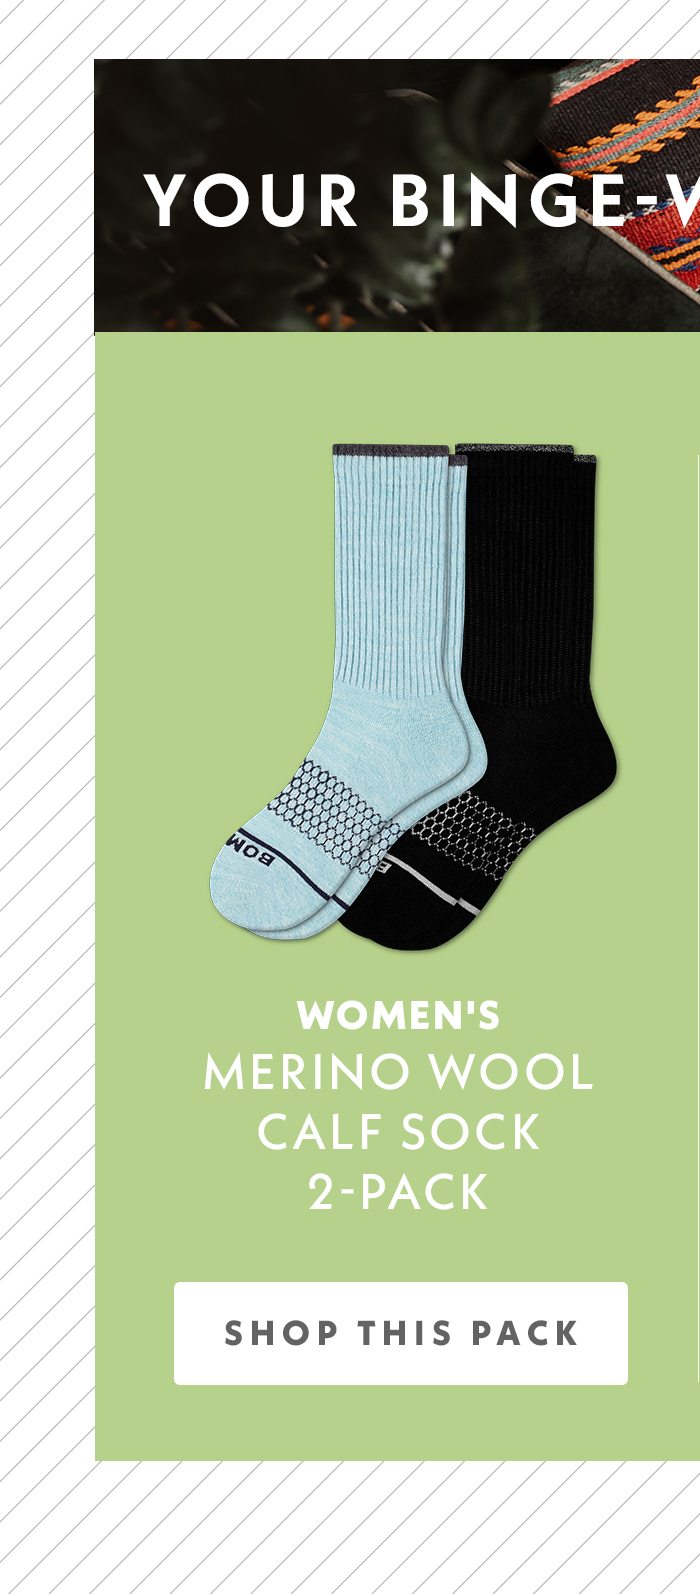 The Couch Queen | Women's Merino Wool Calf Sock 2-Pack | Shop This Pack